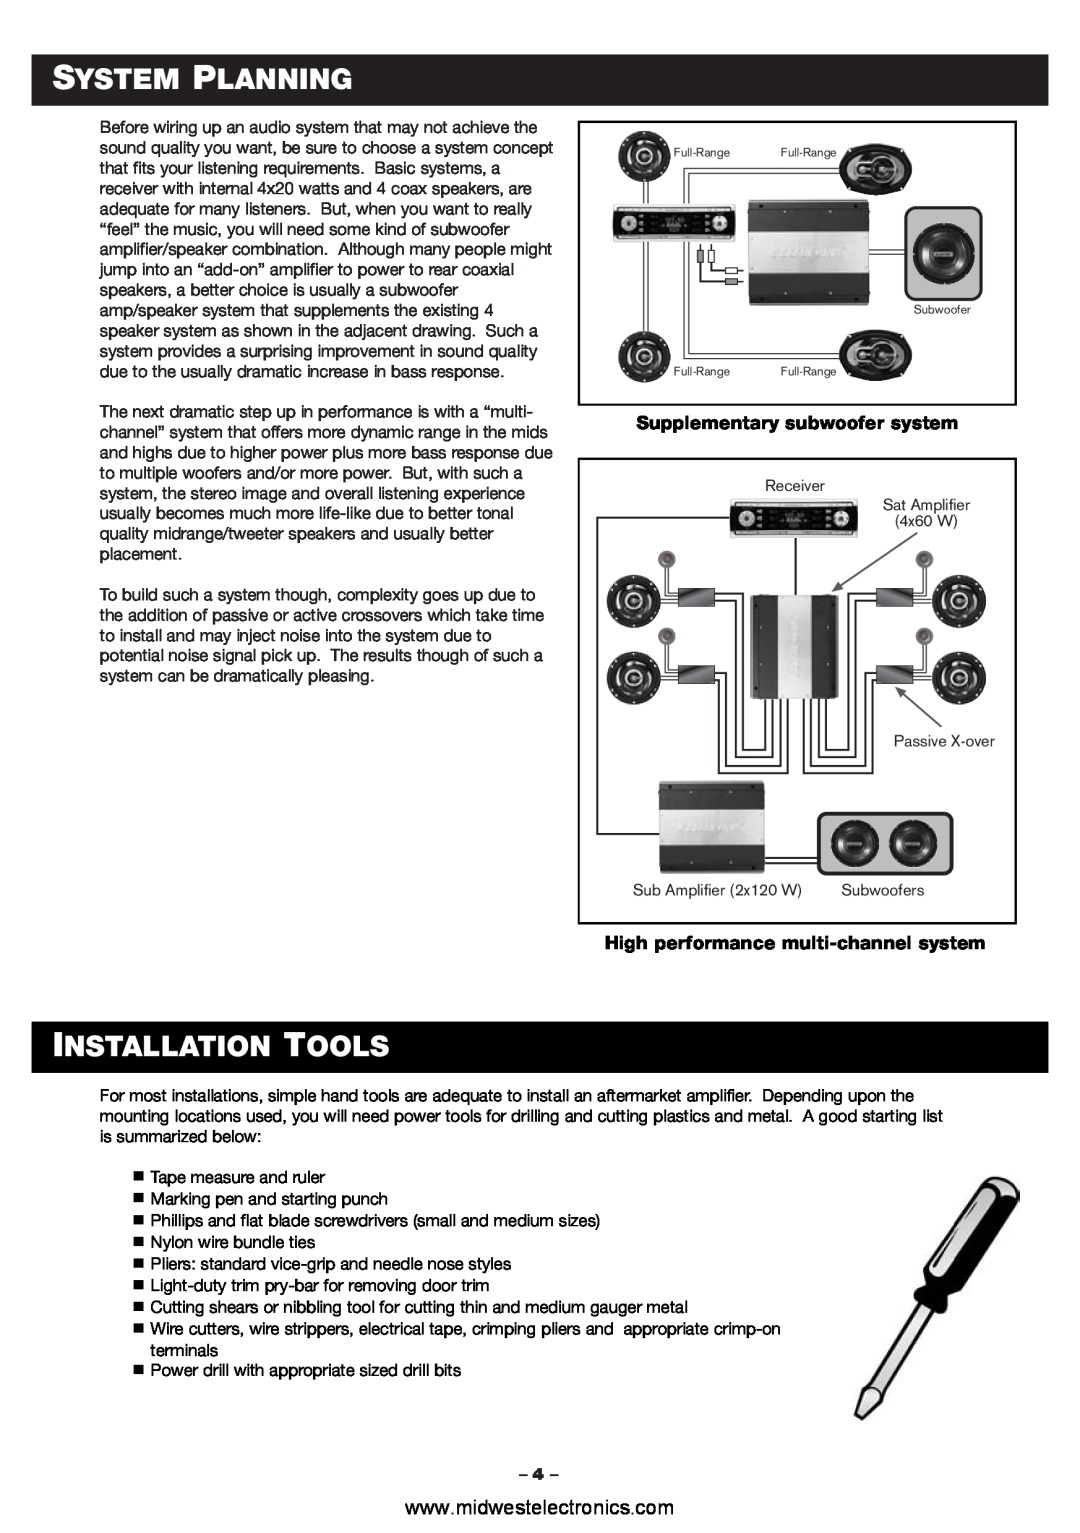 Blaupunkt PCA460 System Planning, Installation Tools, Supplementary subwoofer system, High performance multi-channelsystem 